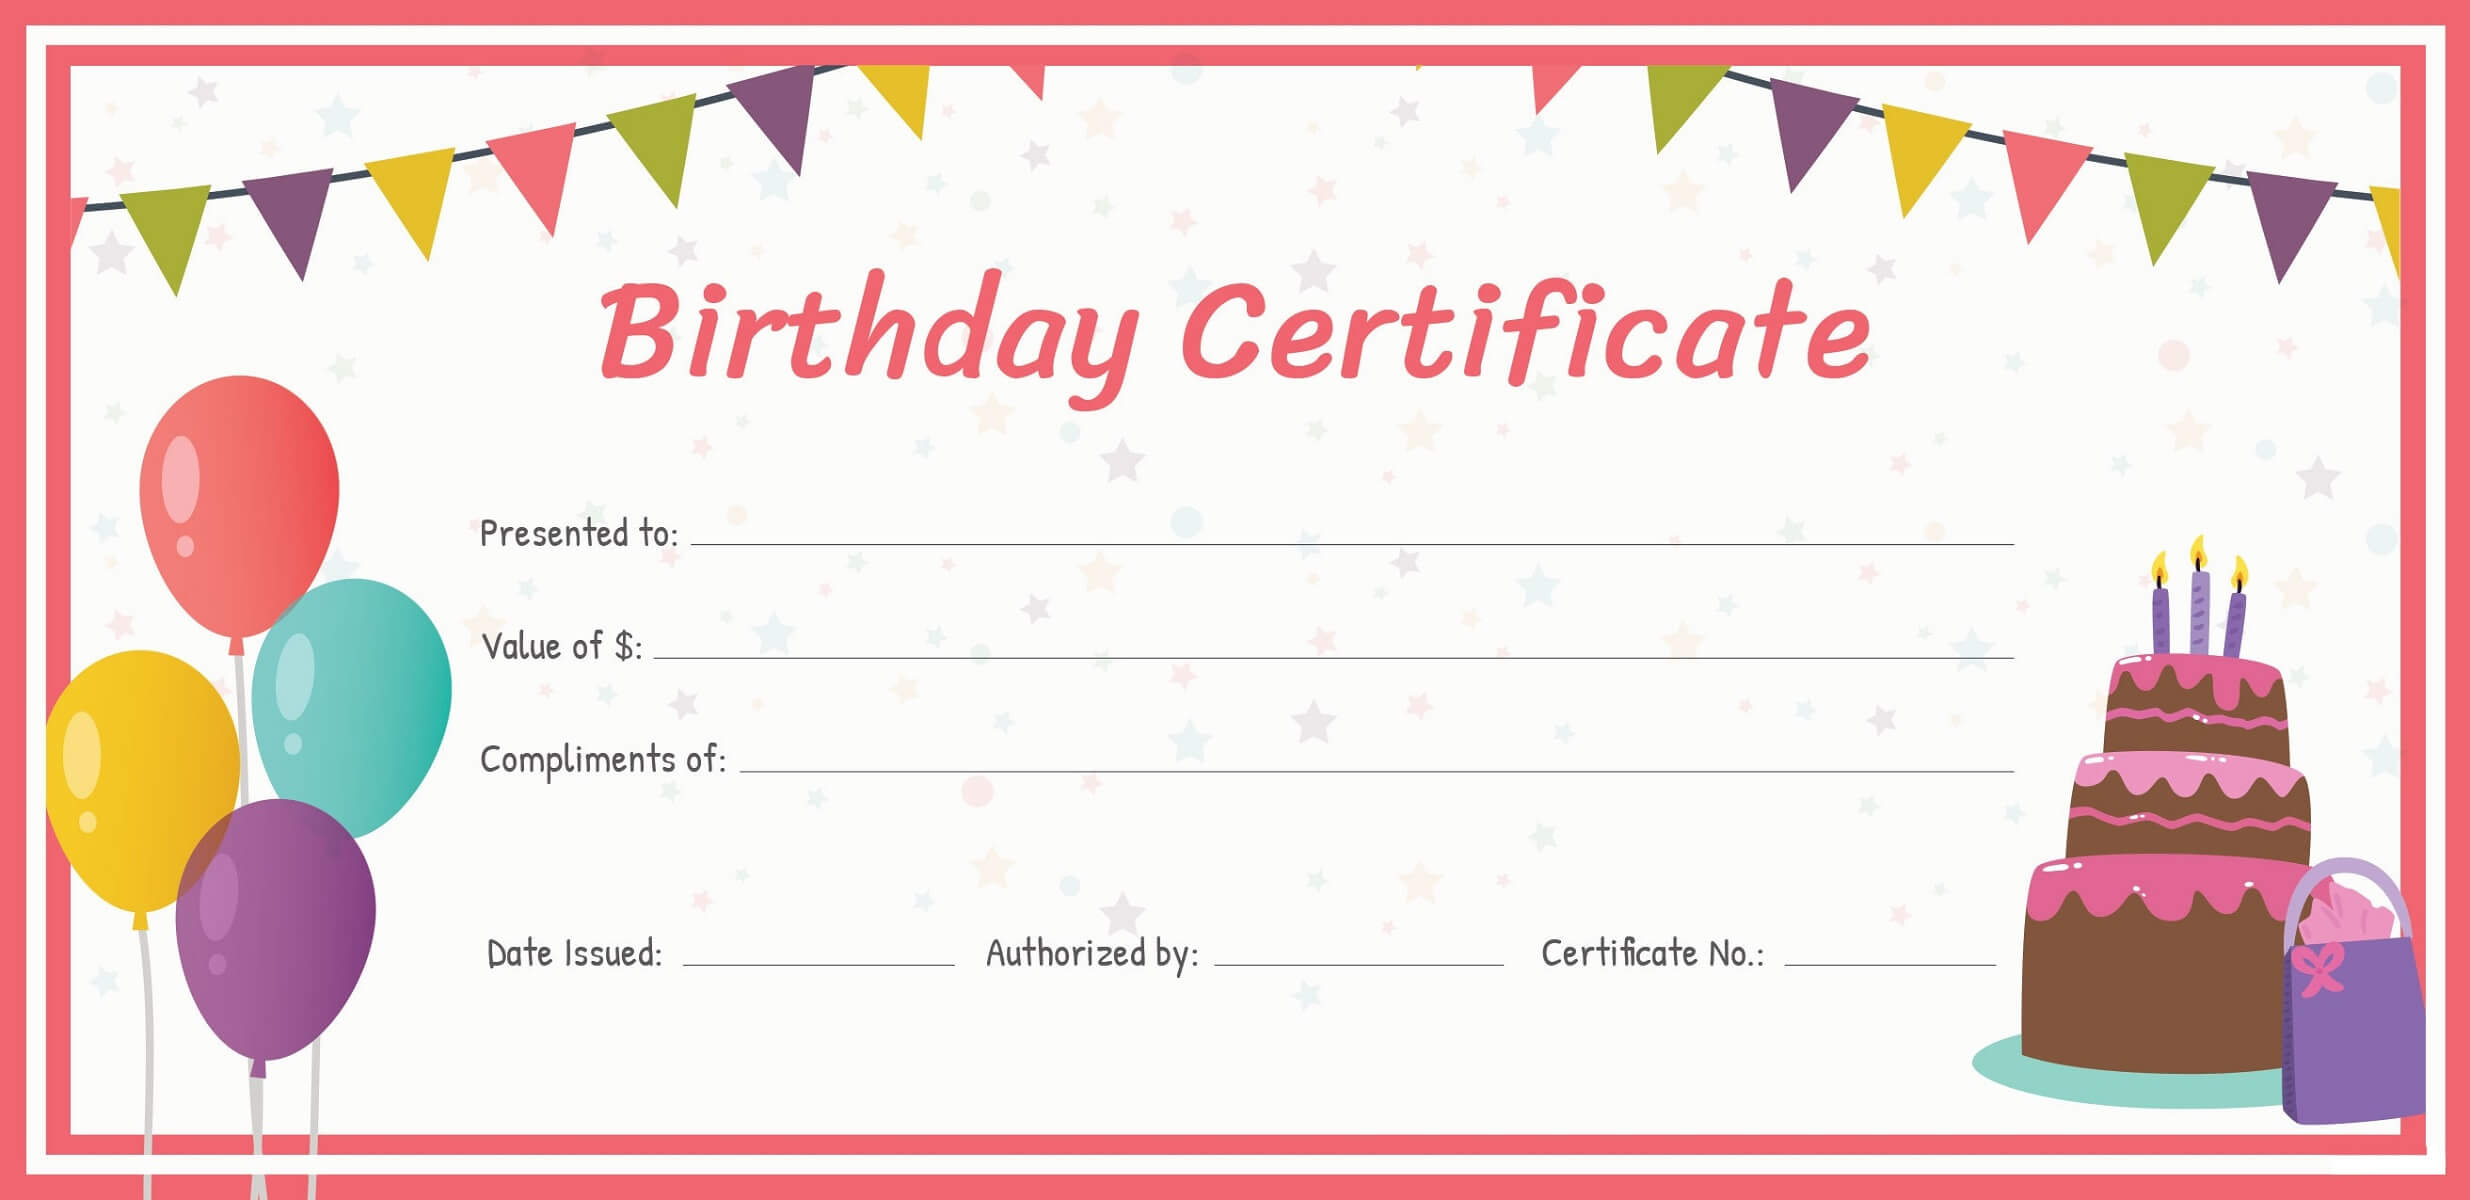 Gift Certificate Templates To Print For Free | 101 Throughout Printable Gift Certificates Templates Free